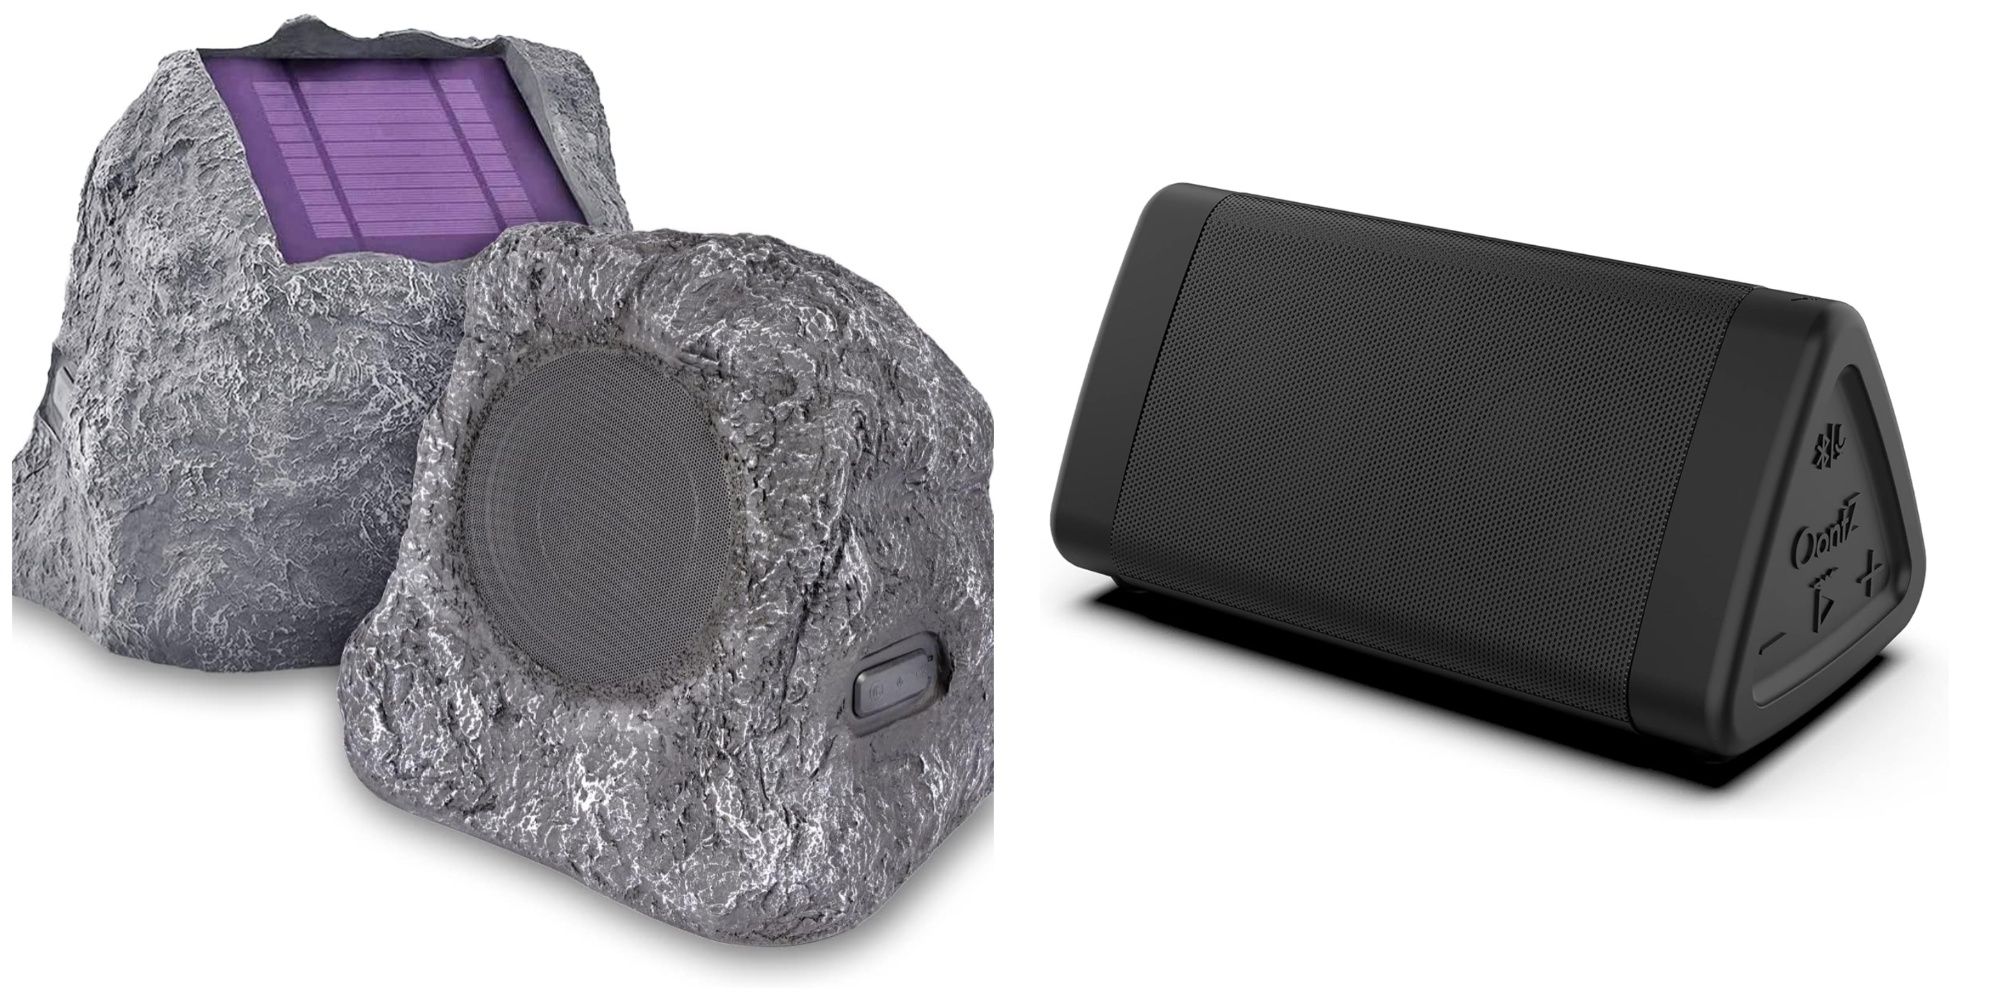 A pair of outdoor speakers. On the left, a pair of faux rocks with speakers and a purple solar panel. On the right, a triangular OontZ Angle 3.